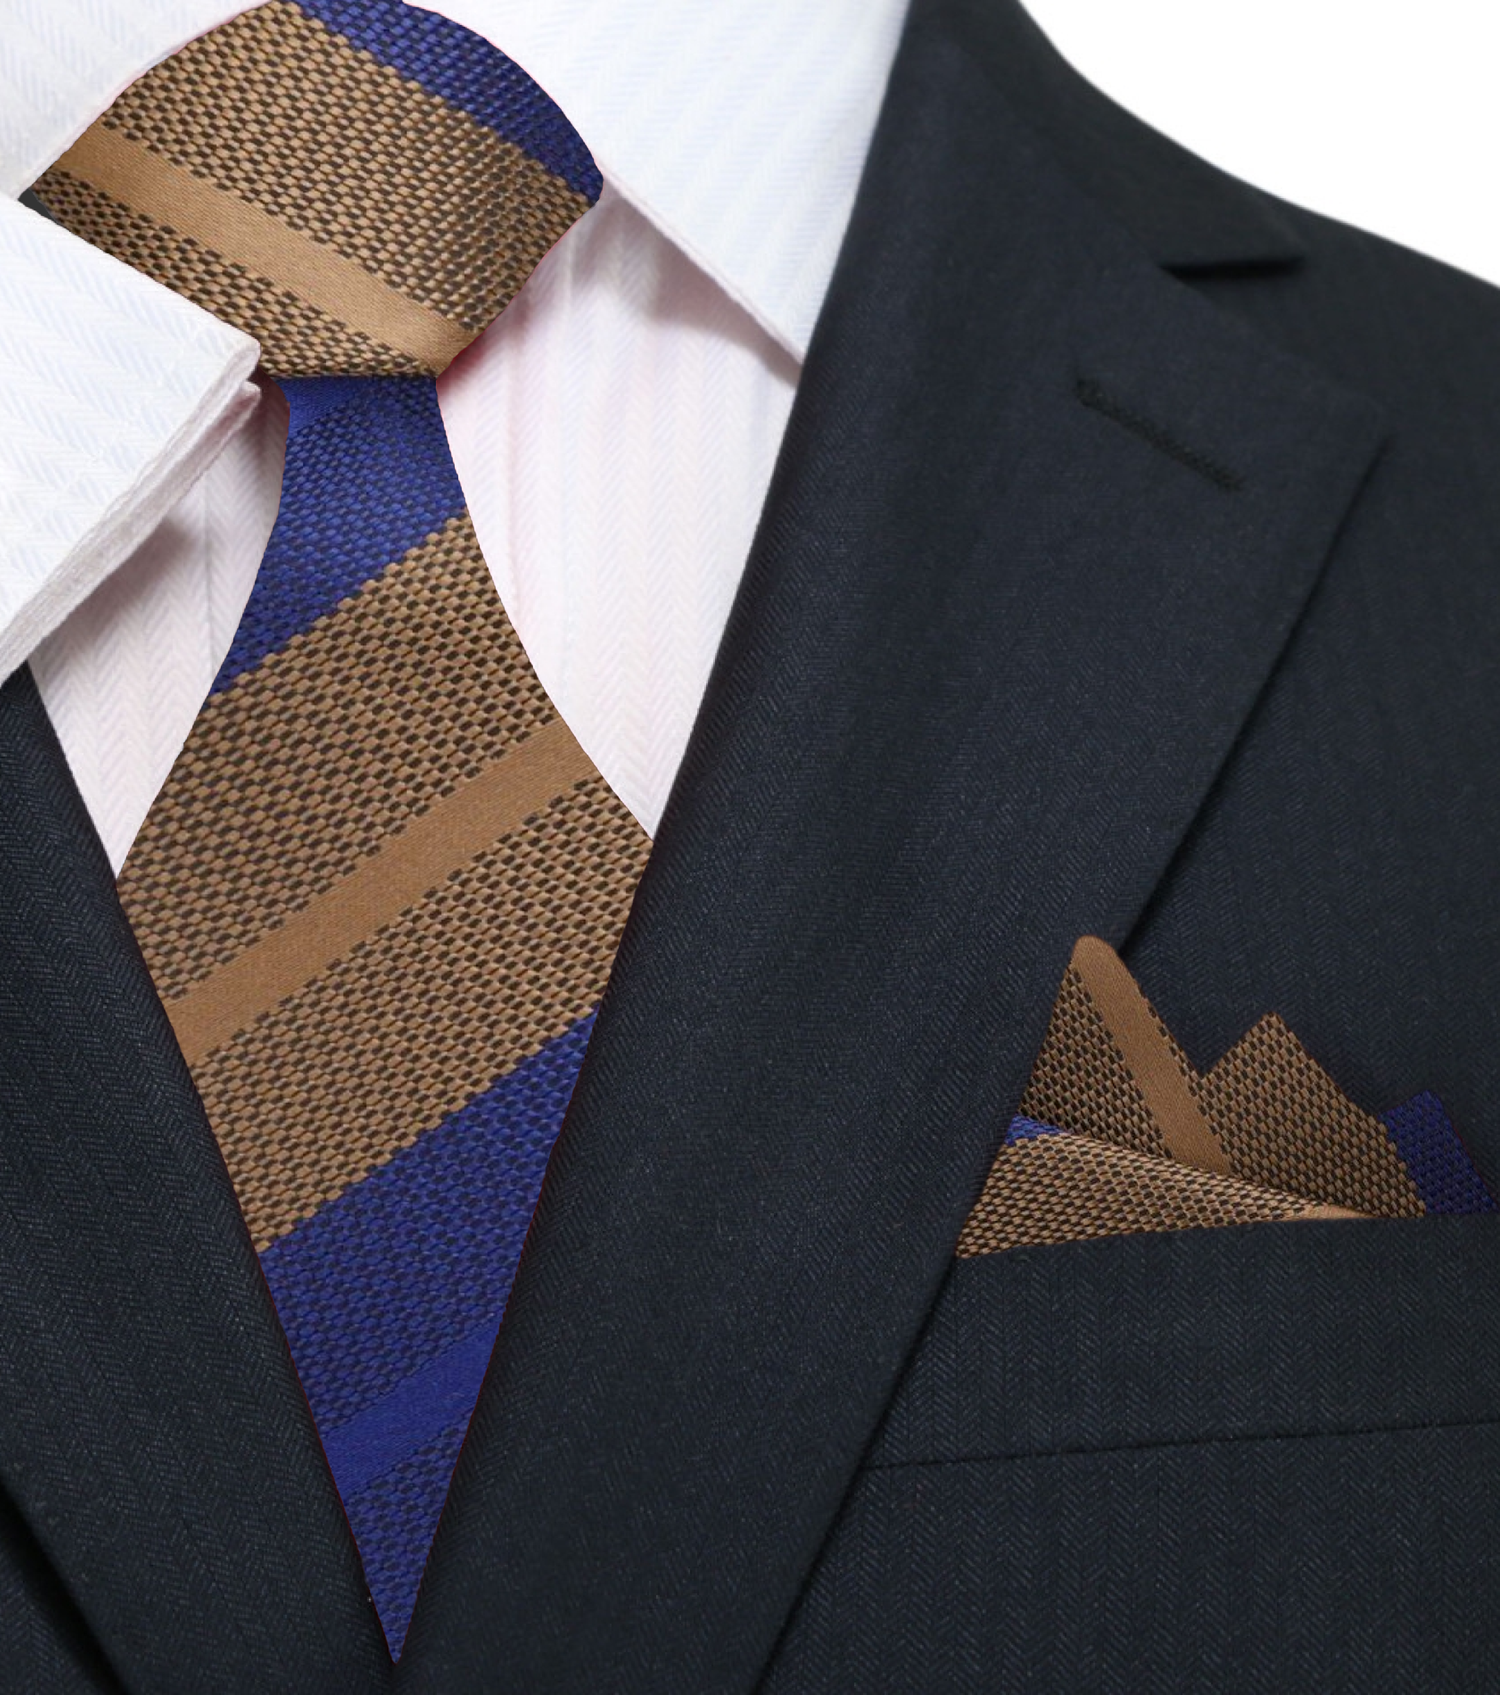 Main View: Blue, Brown Stripe Tie and Pocket Square